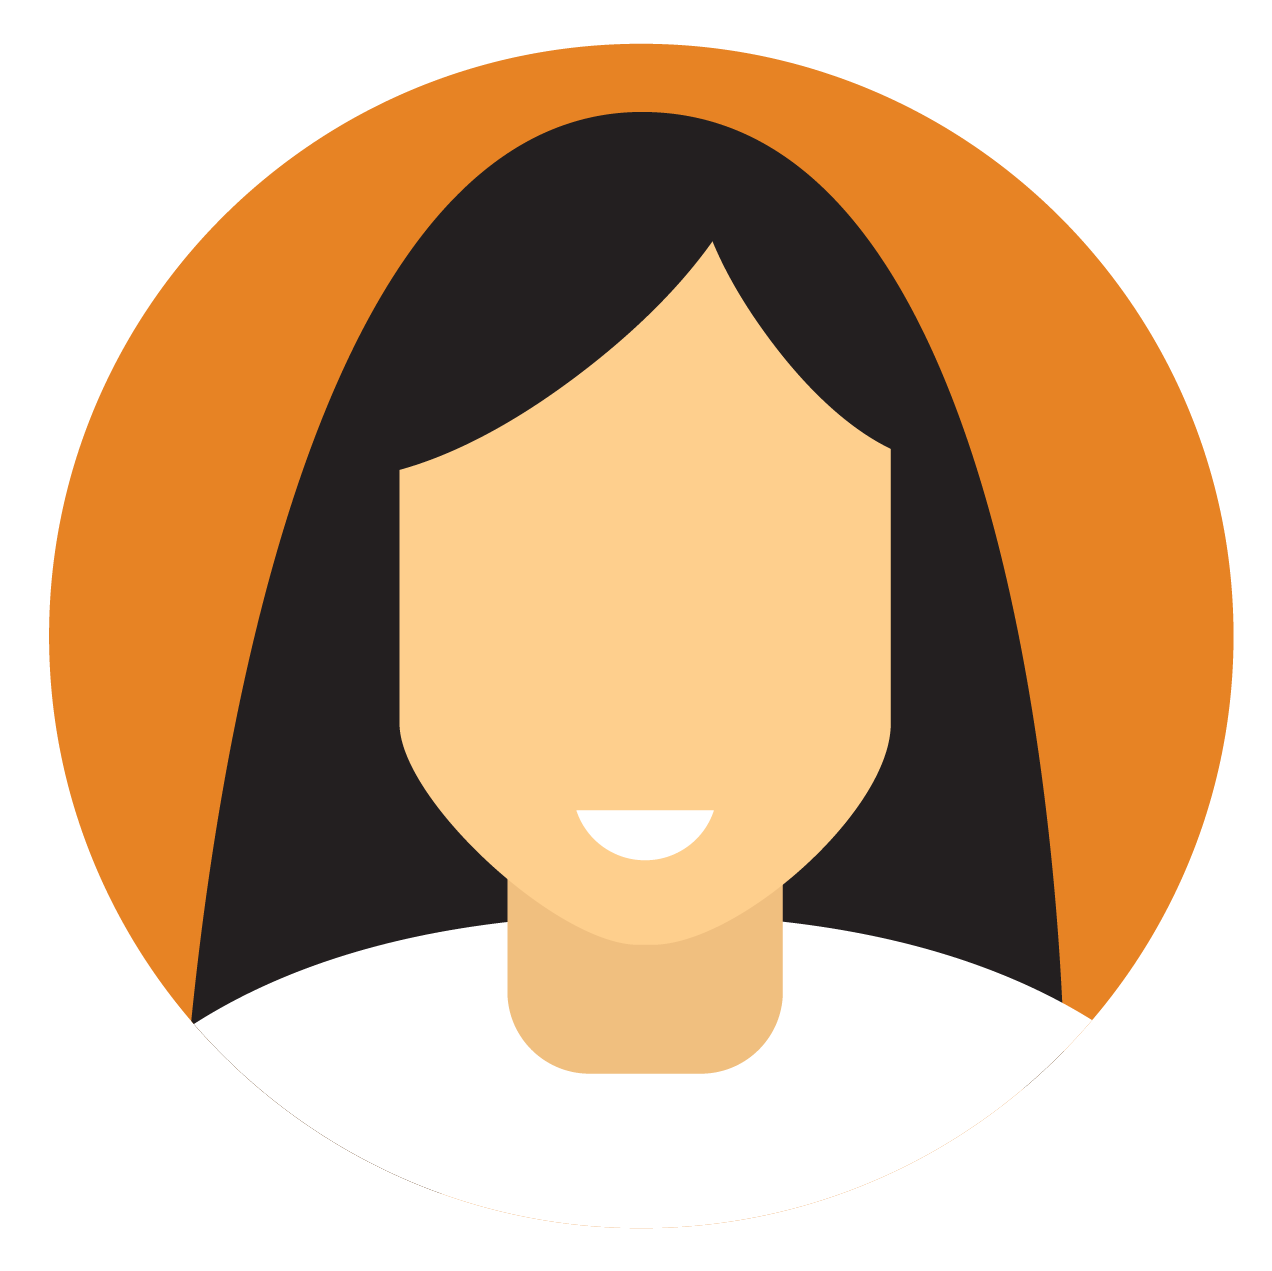 Icon of person with long black hair, white shirt, orange background.